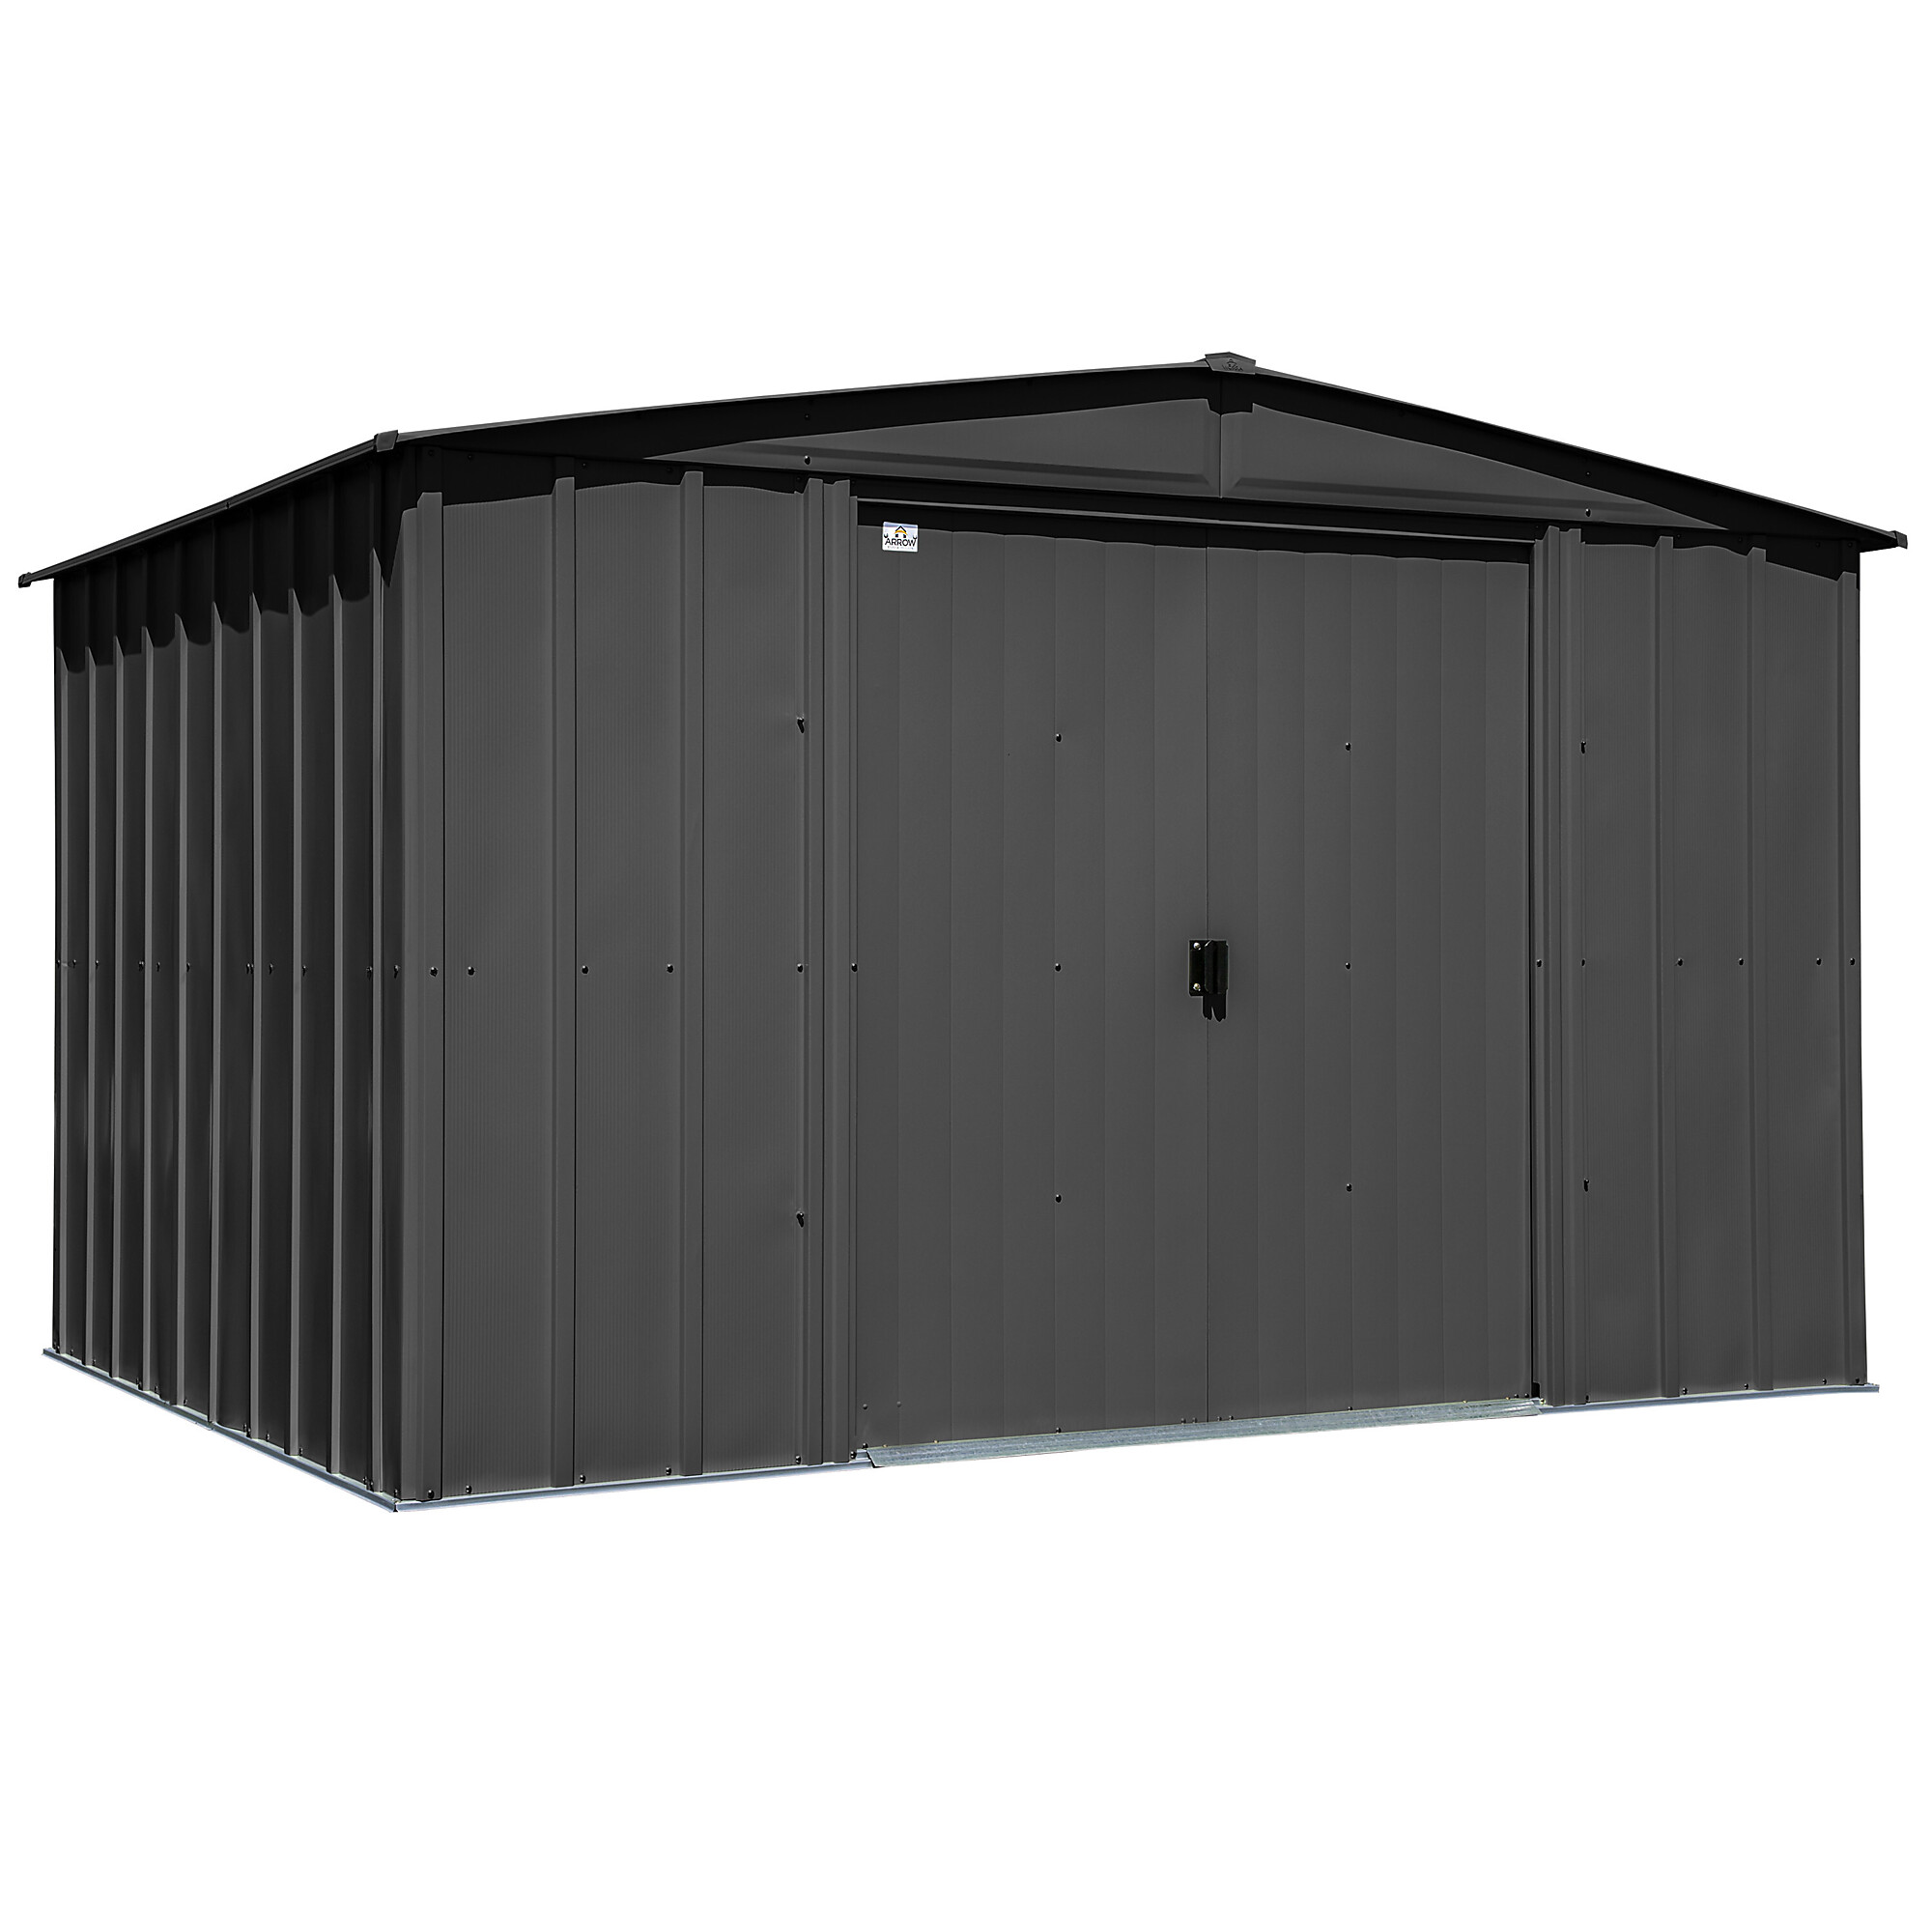 Arrow Storage Products, Classic Steel Shed 10x8 Charcoal CLG108CC, Length 8 ft, Width 10 ft, Model CLG108CC